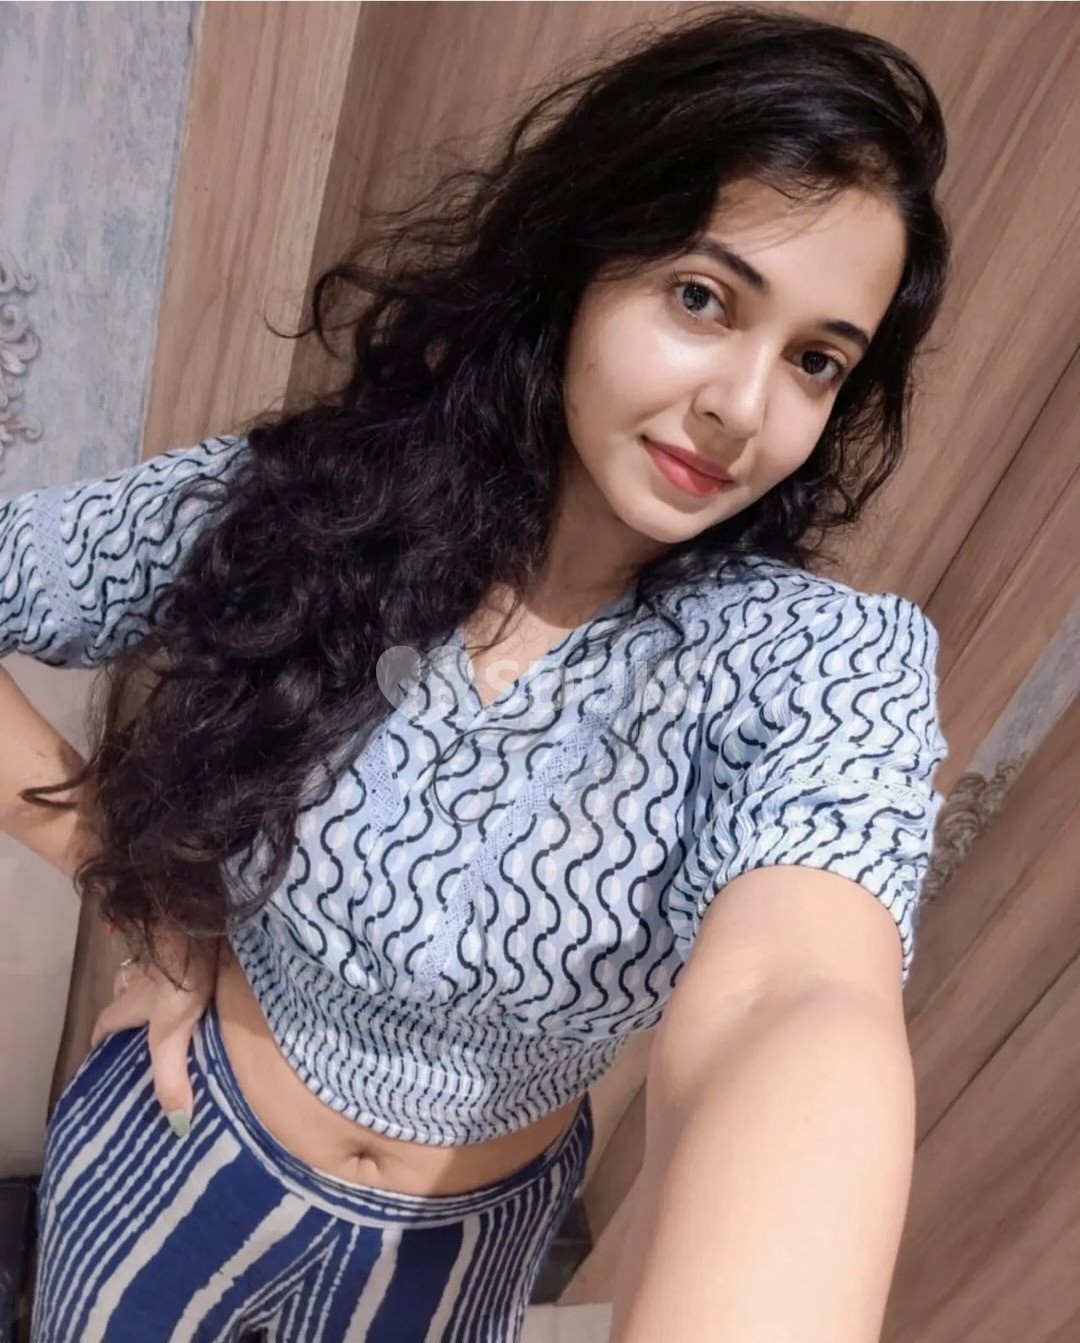 Lb nagar ✅ 24x7 AFFORDABLE CHEAPEST RATE SAFE CALL GIRL SERVICE AVAILABLE OUTCALL AVAILABLE.. ..